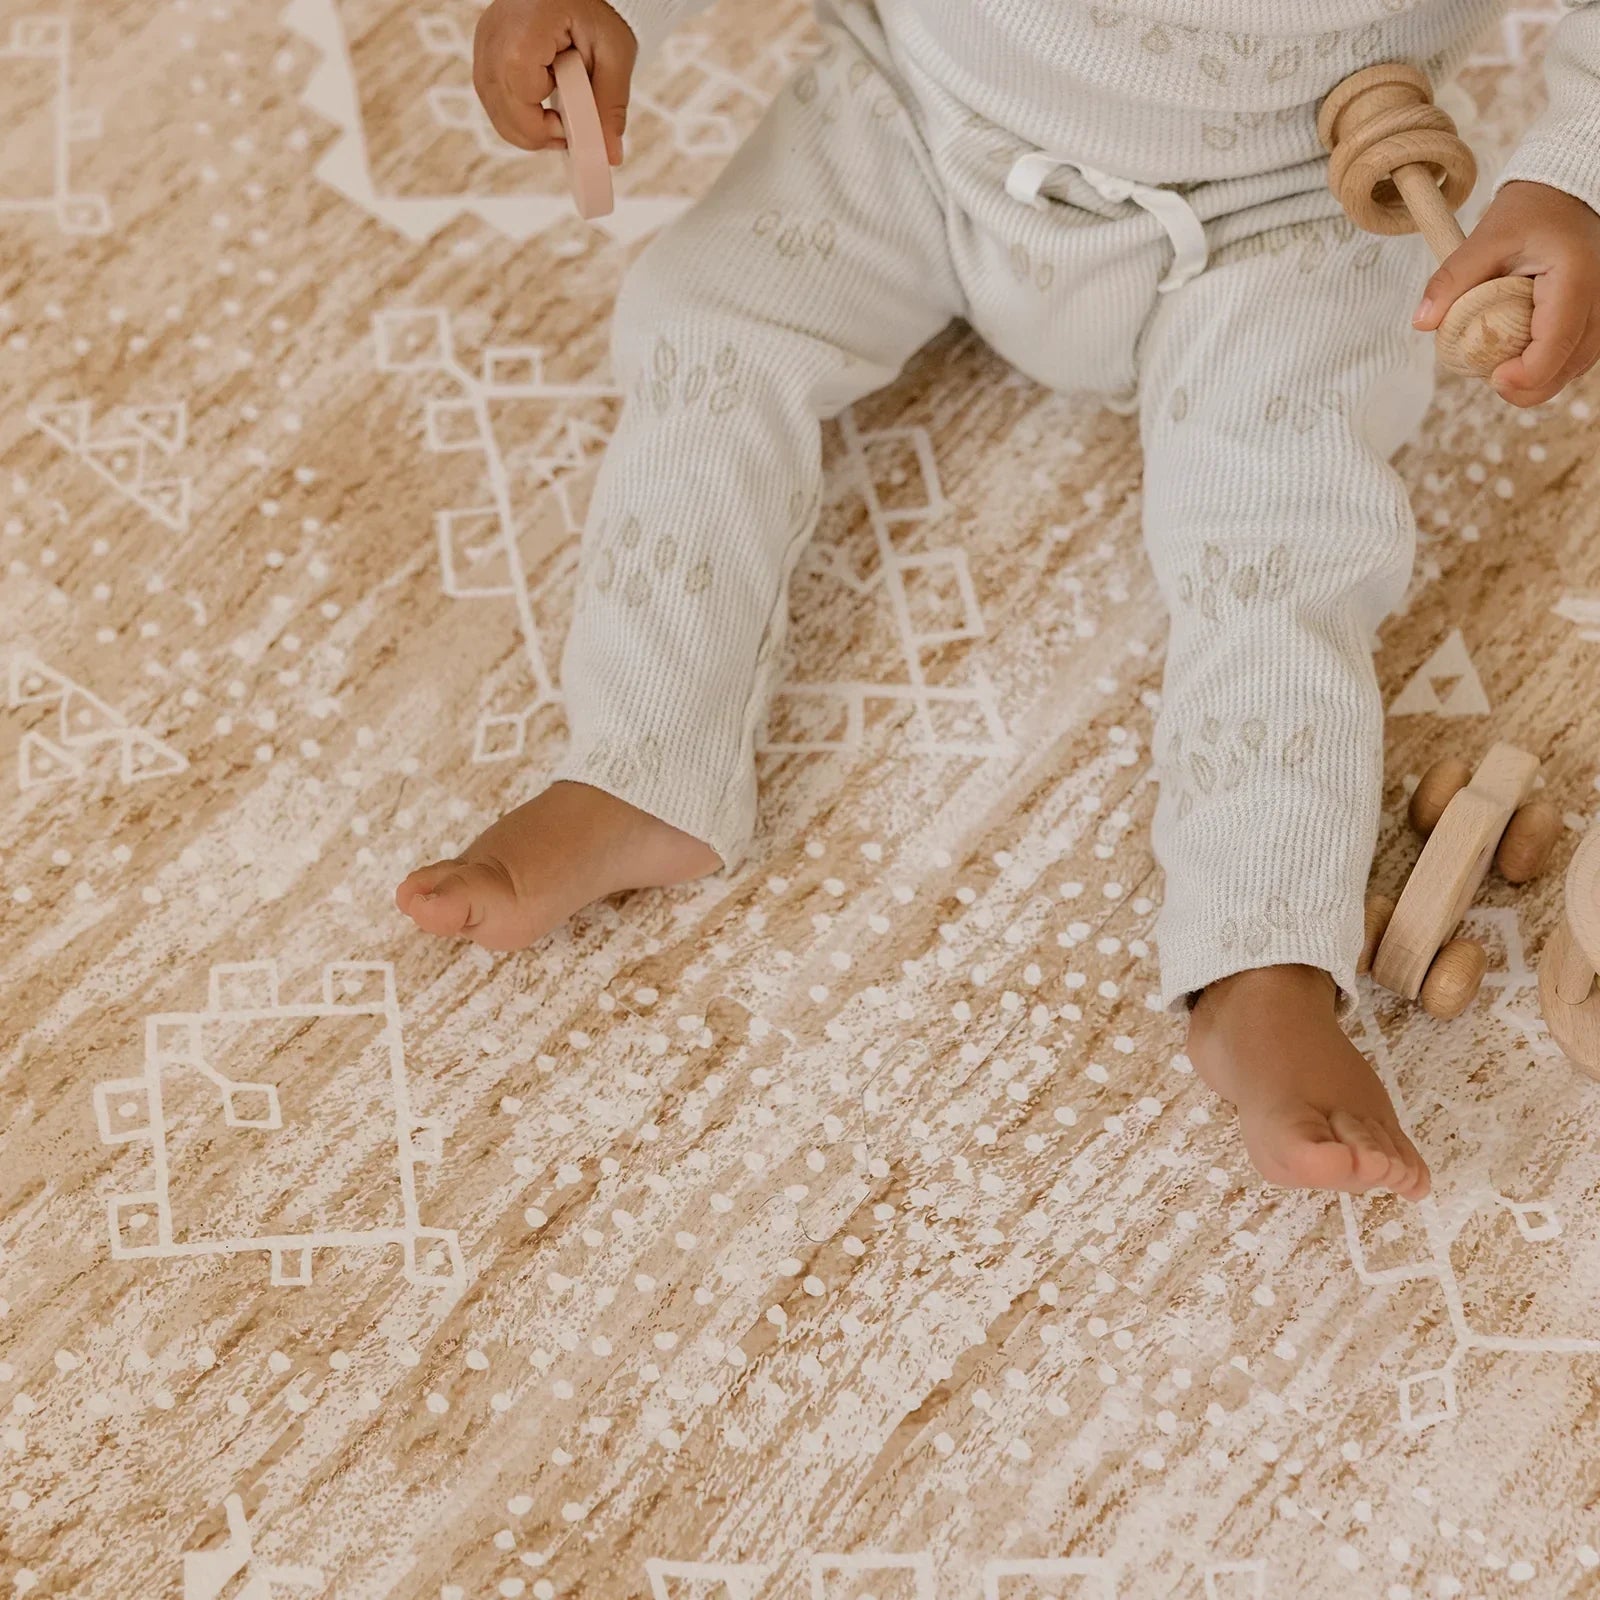 Ula Amber brown minimal boho pattern play mat with babies feet and hands playing with wooden toys